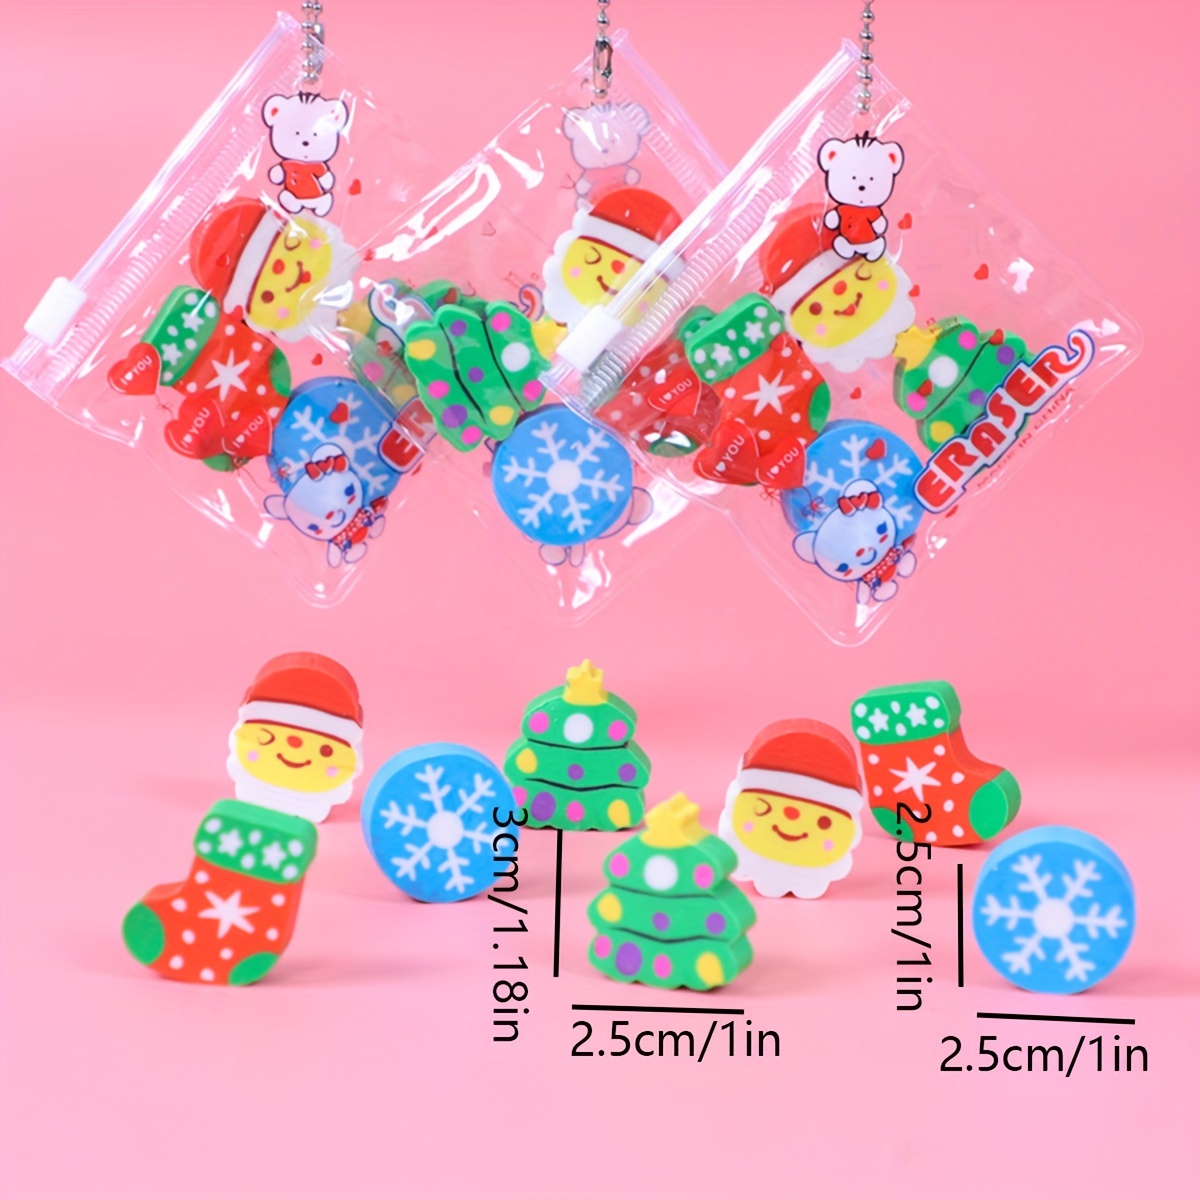 5pcs, Christmas Gifts Christmas School Supplies Erasers Gifts Snowflake  Erasers, Back To School, School Supplies, Kawaii Stationery, Colors For  School